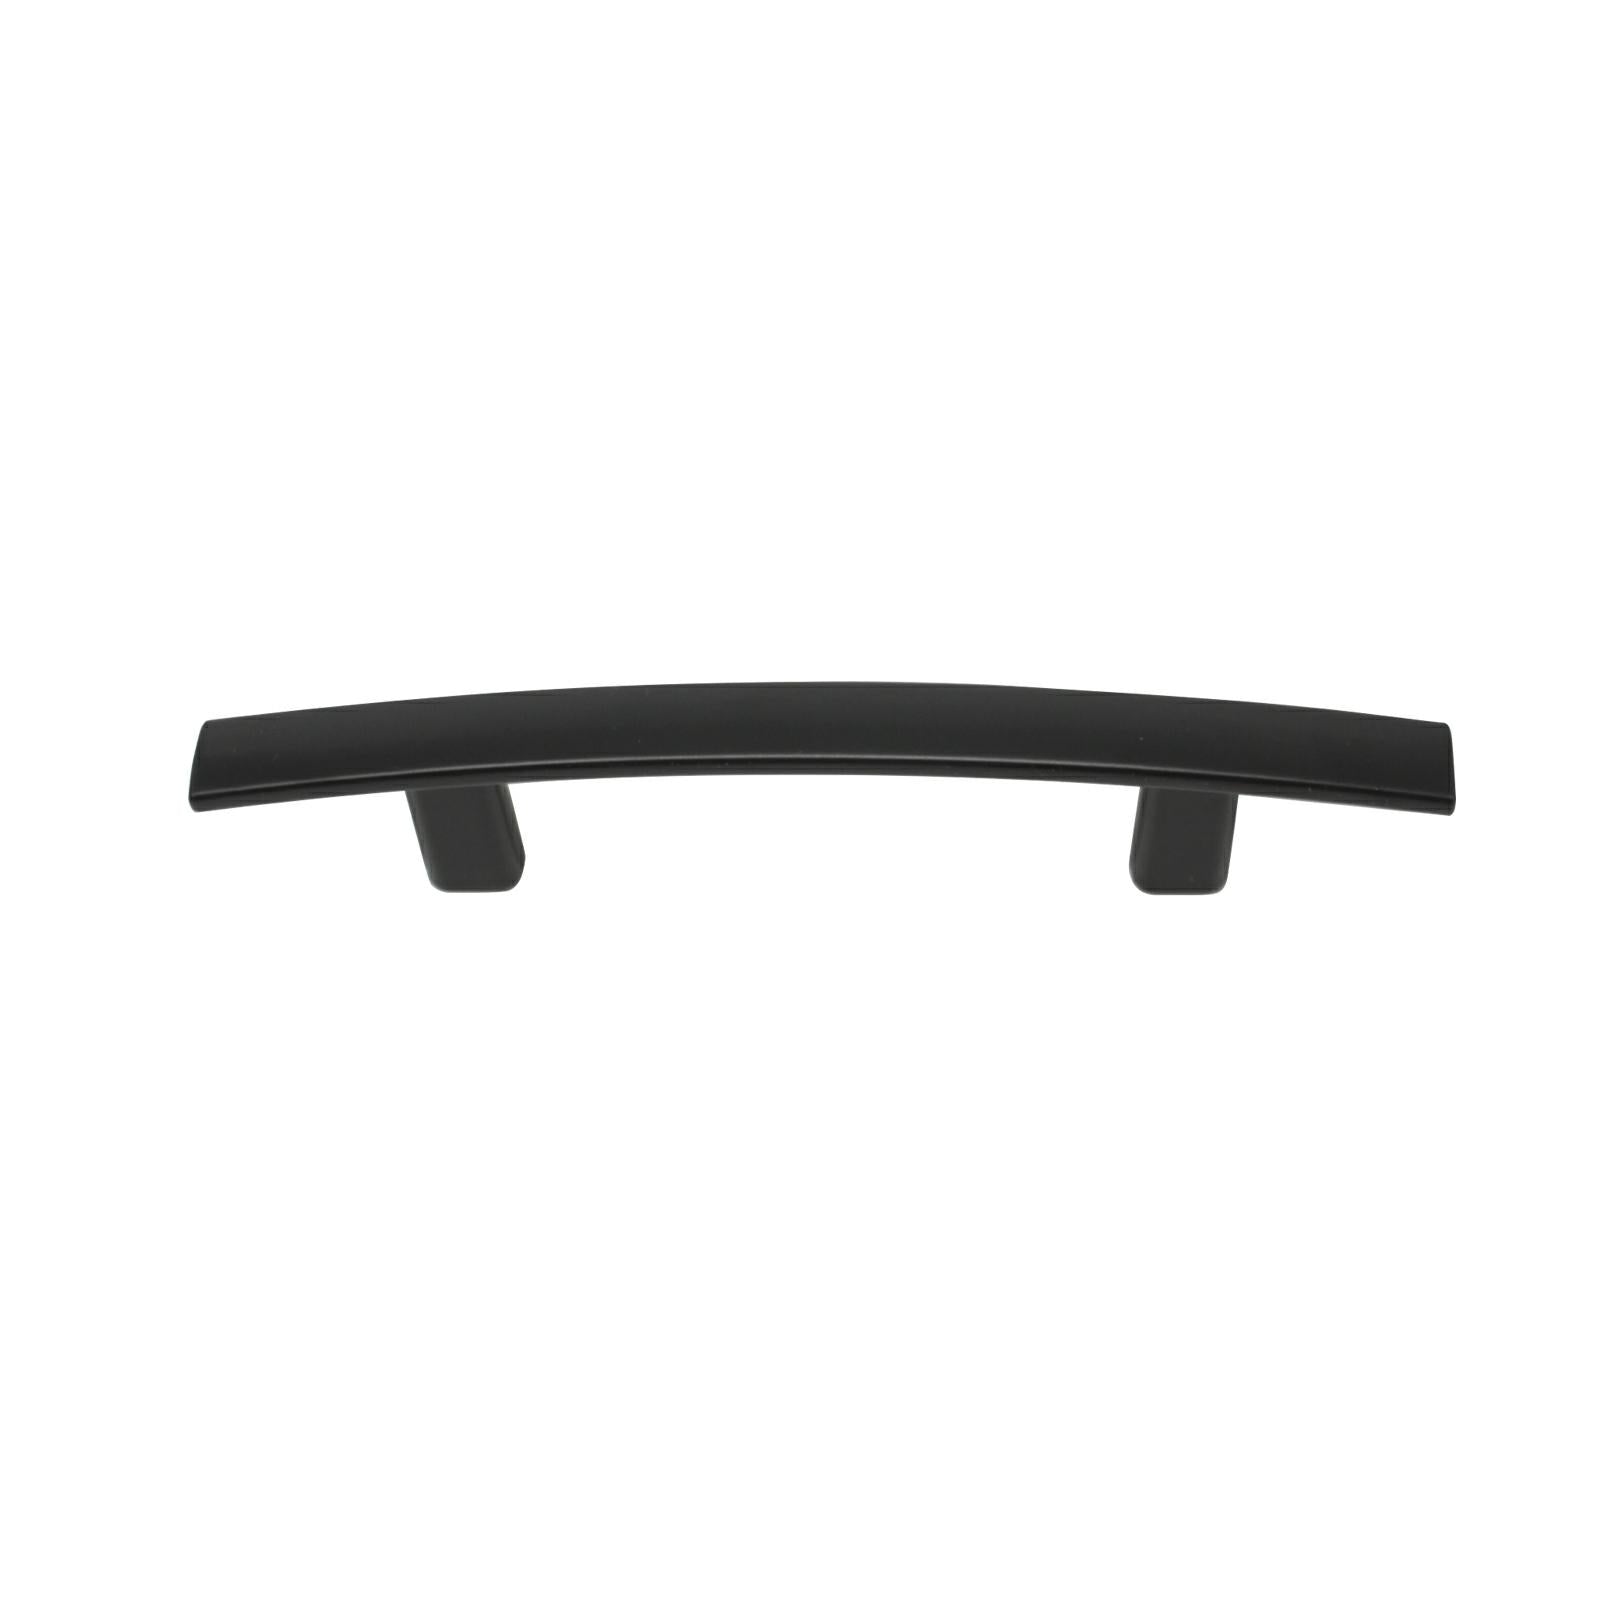 Curved Subtle Arch Cabinet Handles 3inch 76mm Hole Centers Black Finish PD81670BK76 - Probrico